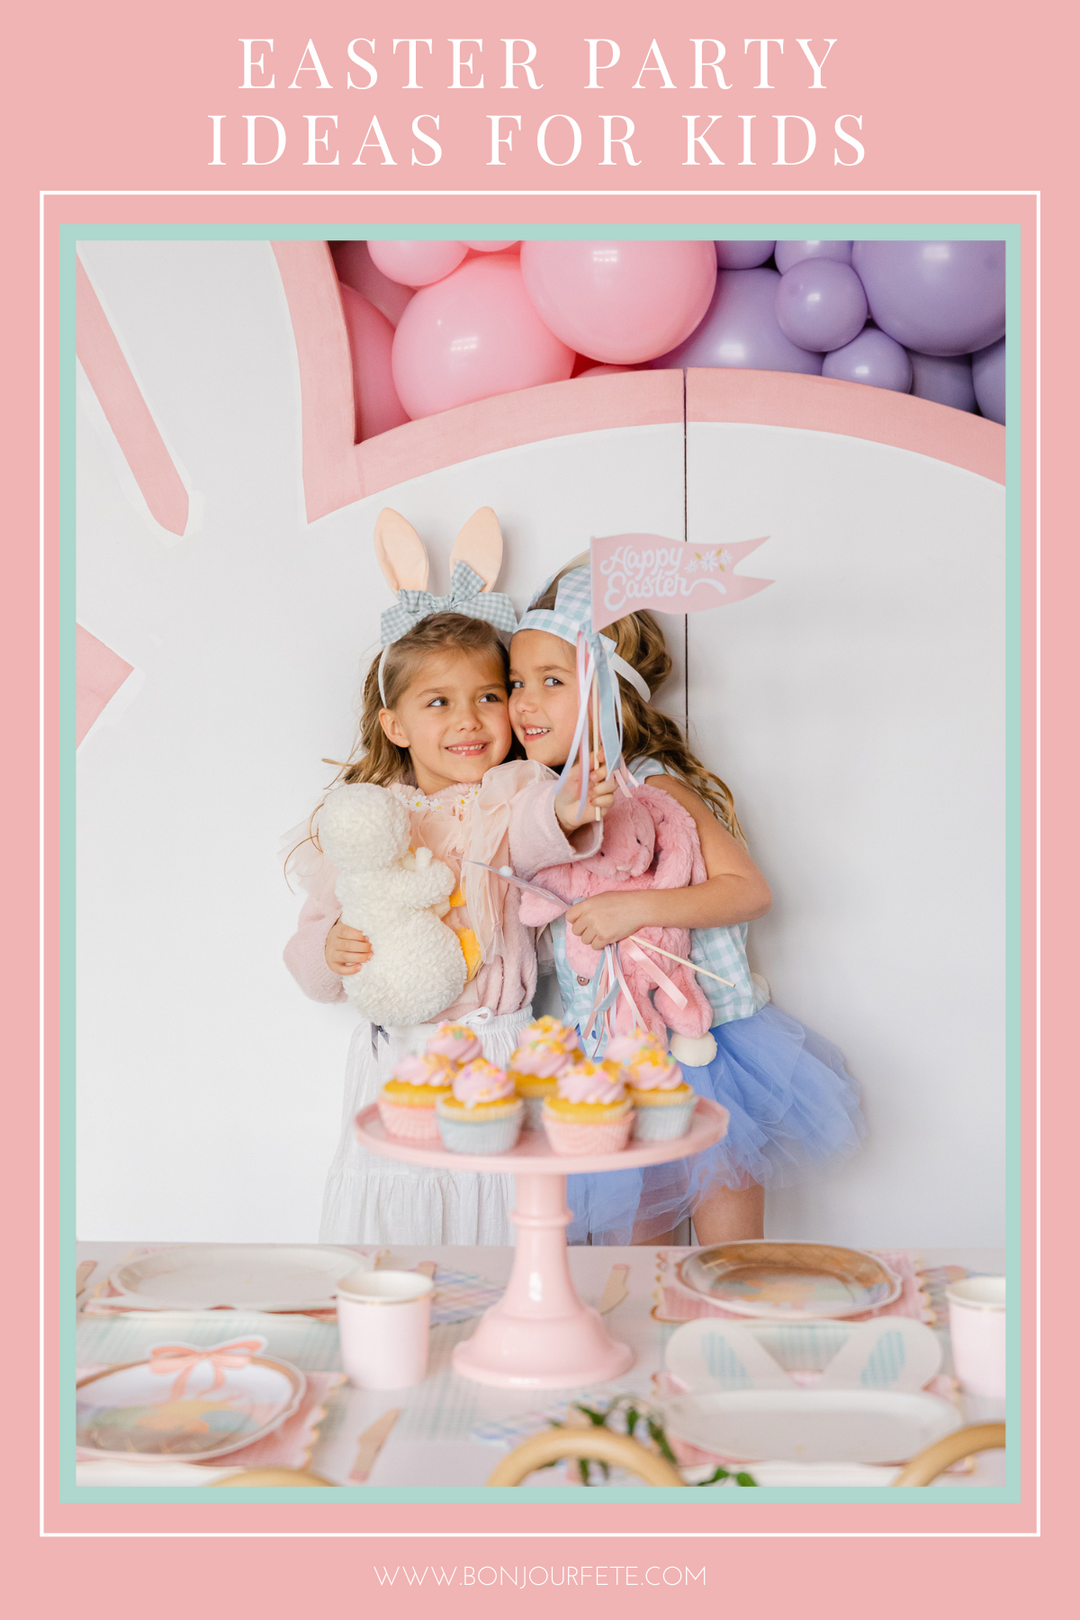 EASTER PARTY IDEAS FOR KIDS AND FAMILIES